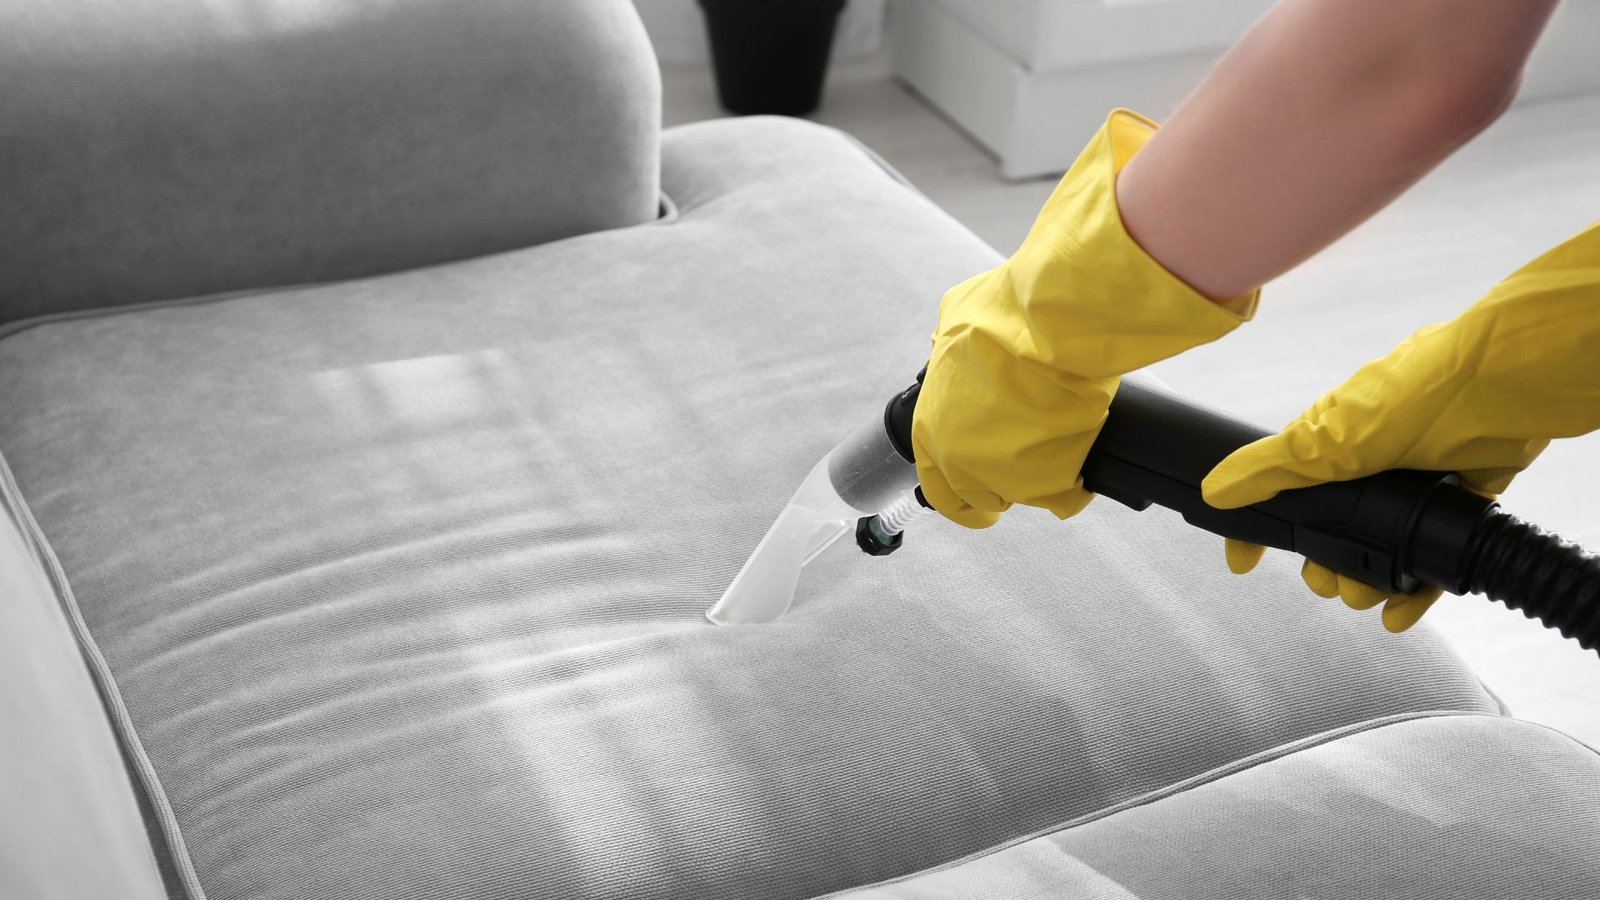 What Makes White Glove Different From Other Cleaning Services?